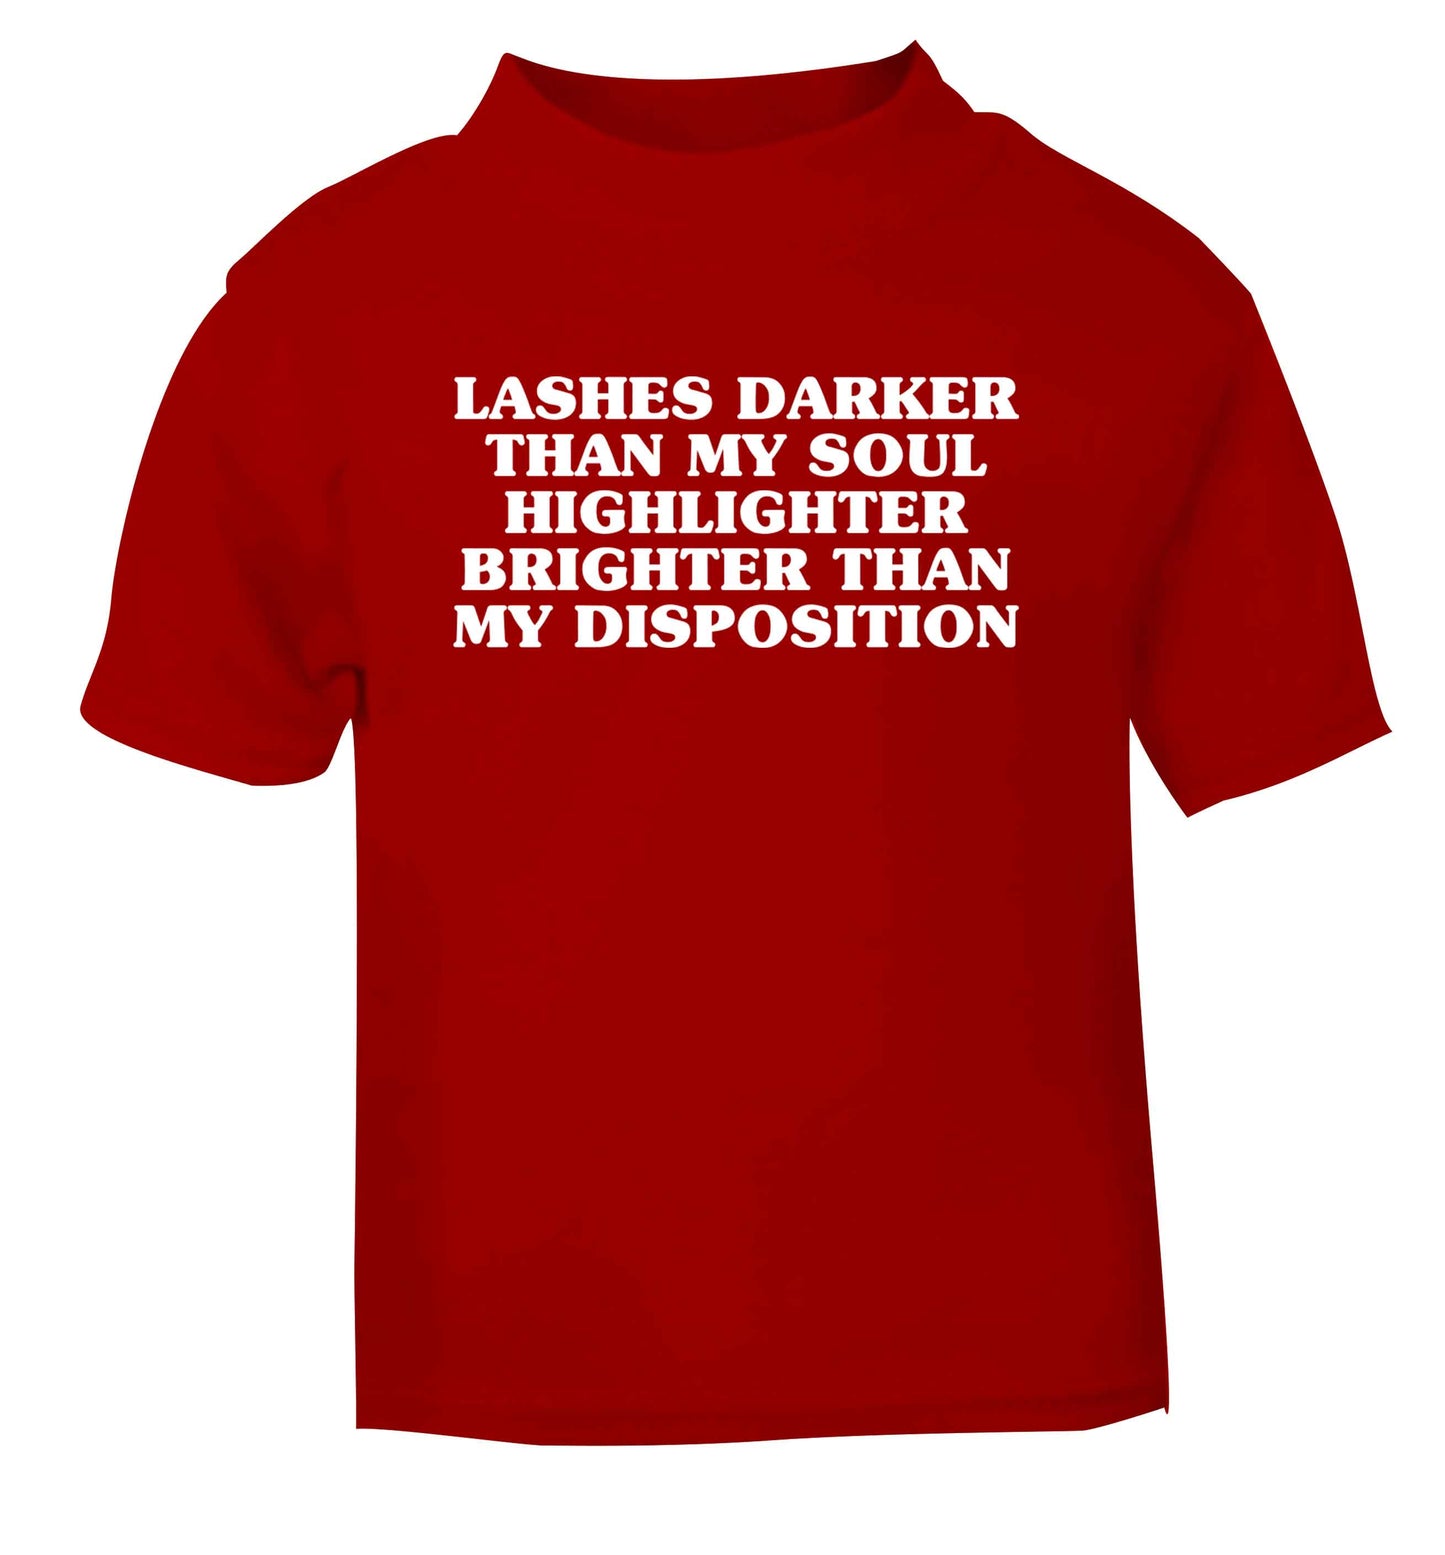 Lashes darker than my soul, highlighter brighter than my disposition red Baby Toddler Tshirt 2 Years